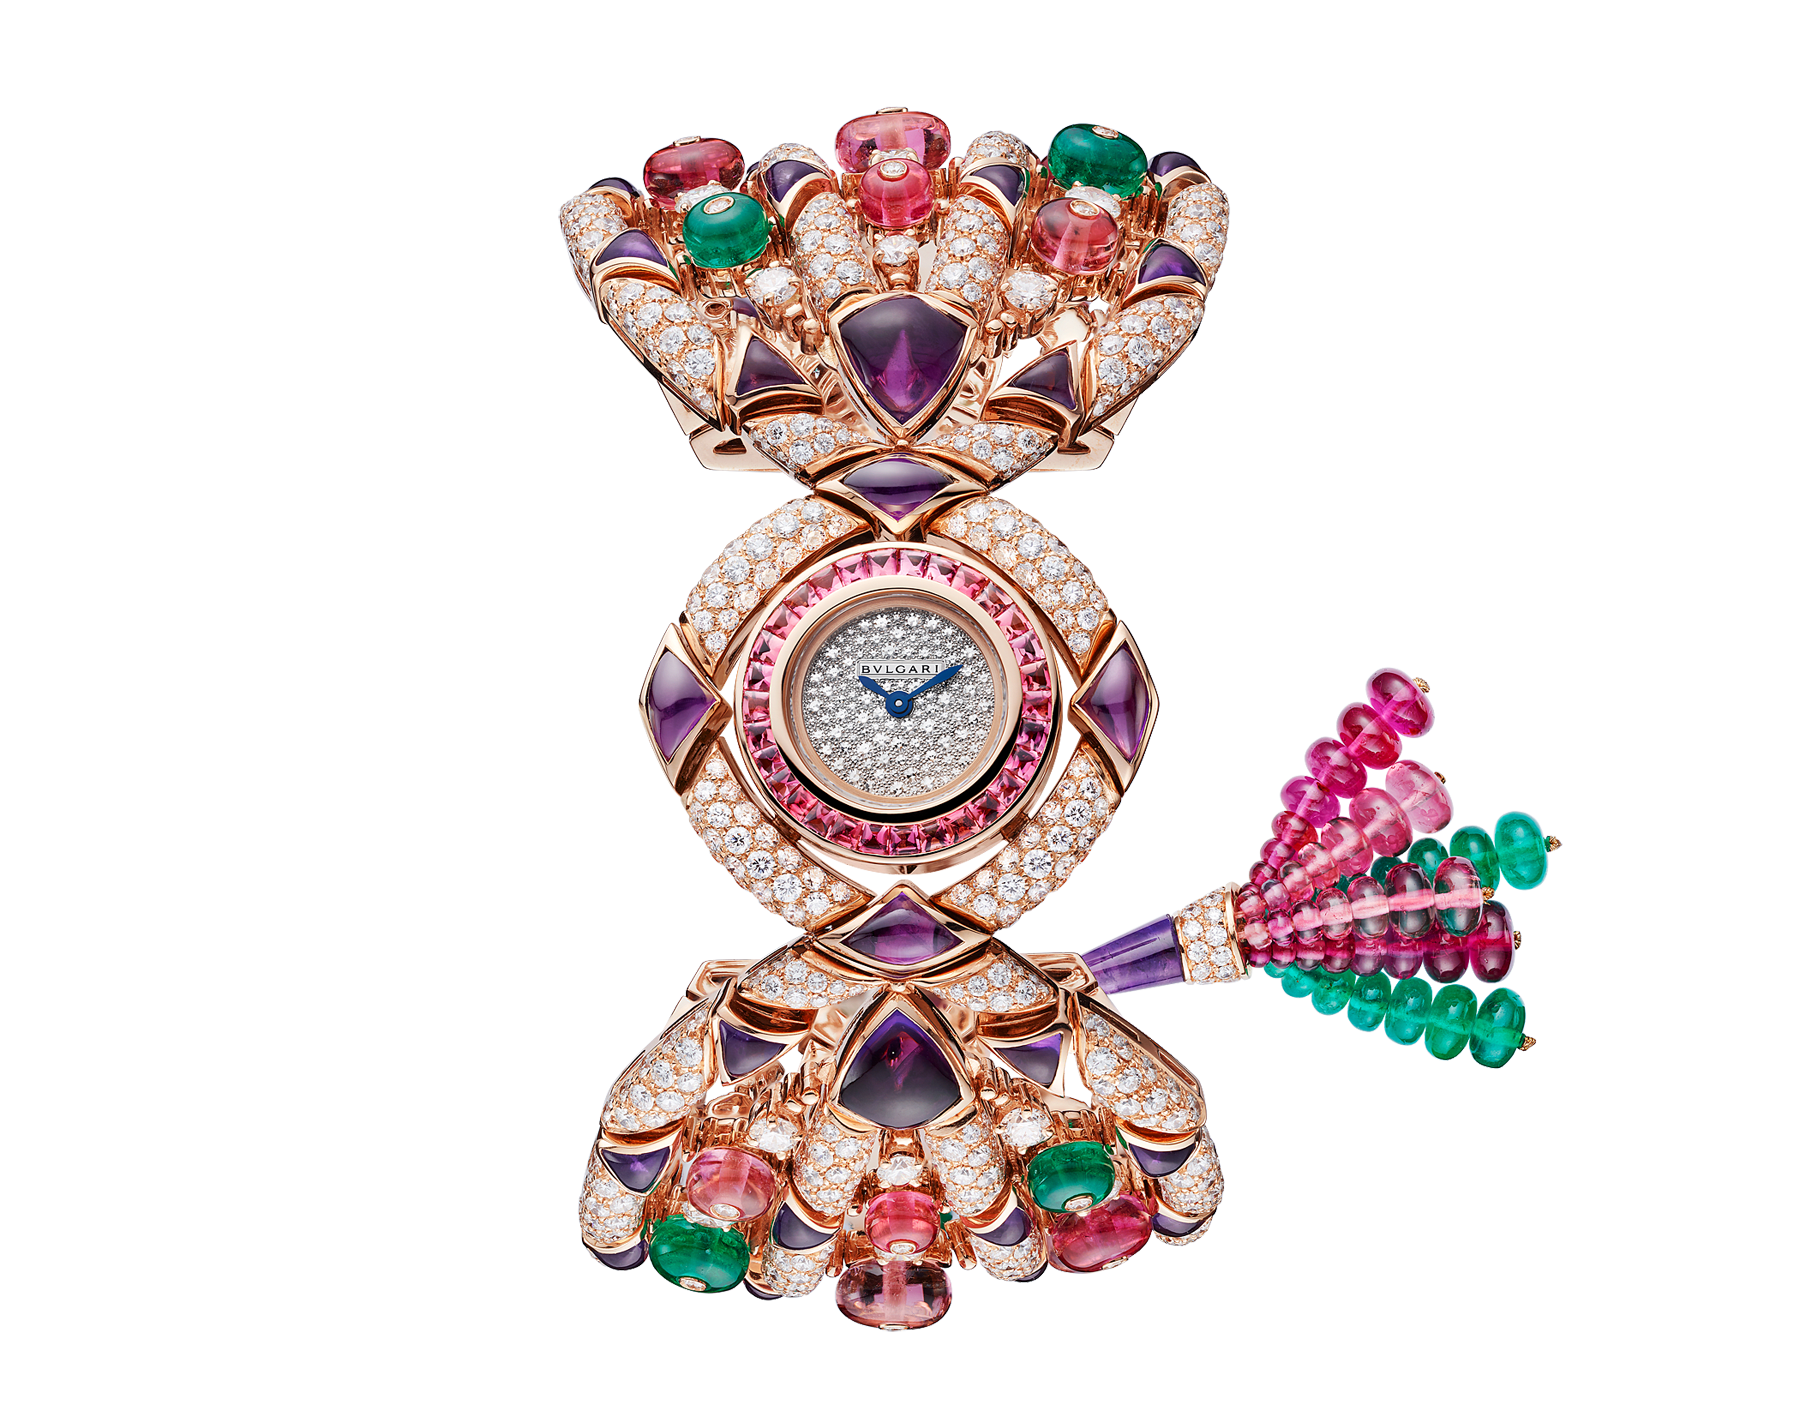 Gemma watch with 18 kt rose gold case set with buff-cut tourmalines, brilliant-cut diamonds and amethyst elements, snow pavé dial, 18 kt rose gold bracelet set with brilliant-cut diamonds, amethyst elements, tourmaline, rubellite and emerald beads 102243 image 1